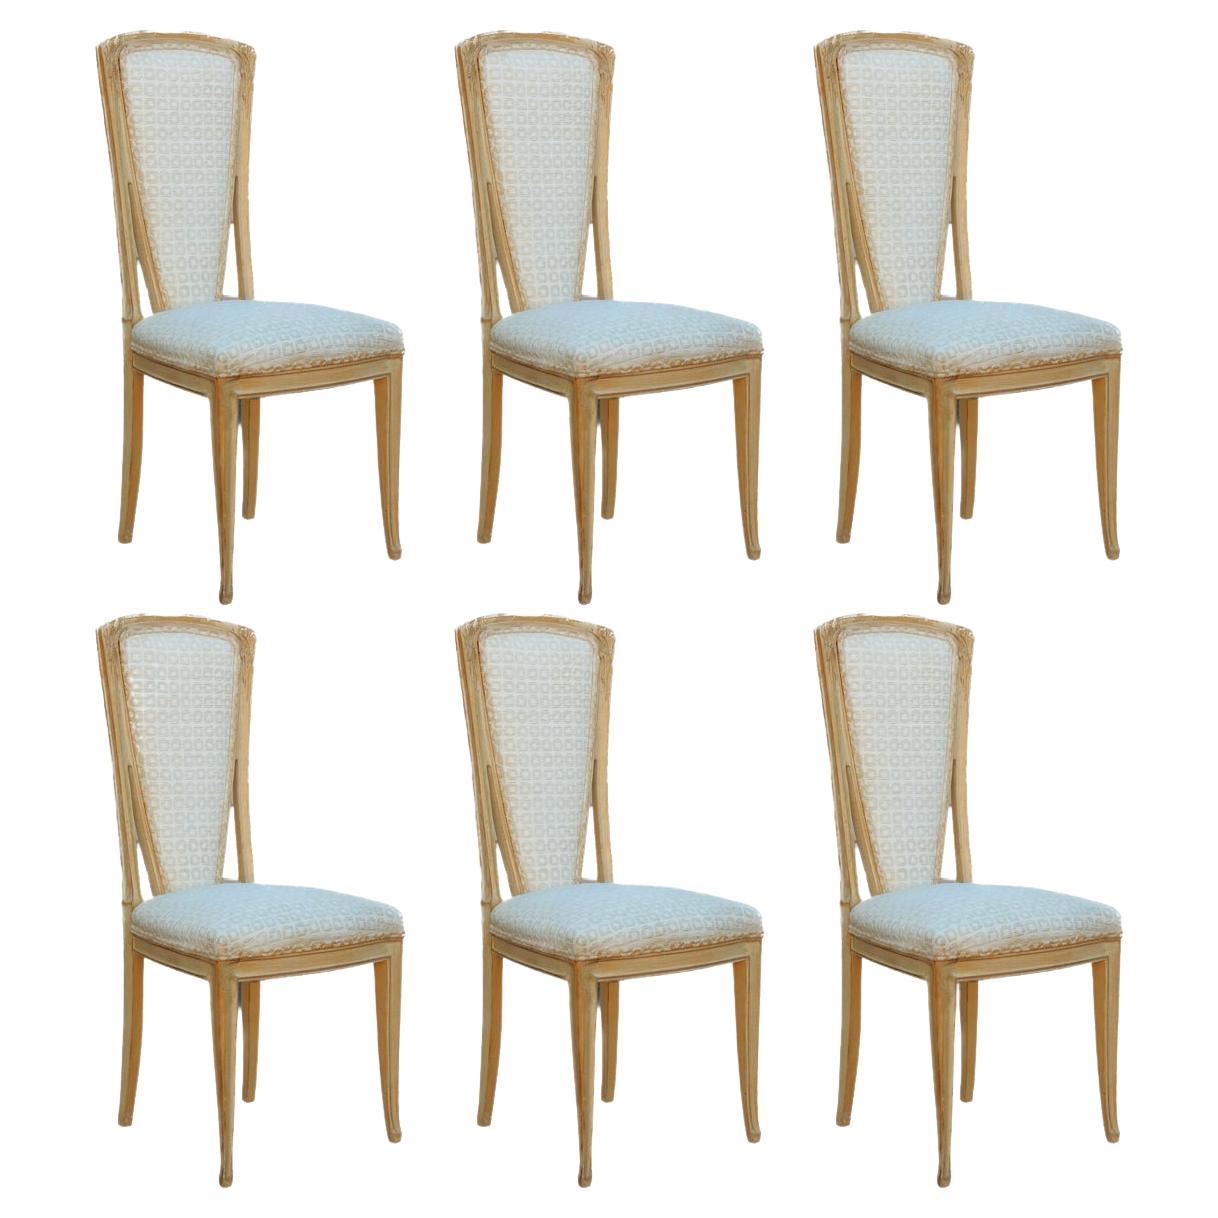 French Art Nouveau dining chairs with carved walnut frames featuring carved floral motif at the tops of each chair, a washed enamel finish and upholstered in a textured Boucle'.  Elegant and graceful.
Set of 6, all identical. Circa 1950's or older,